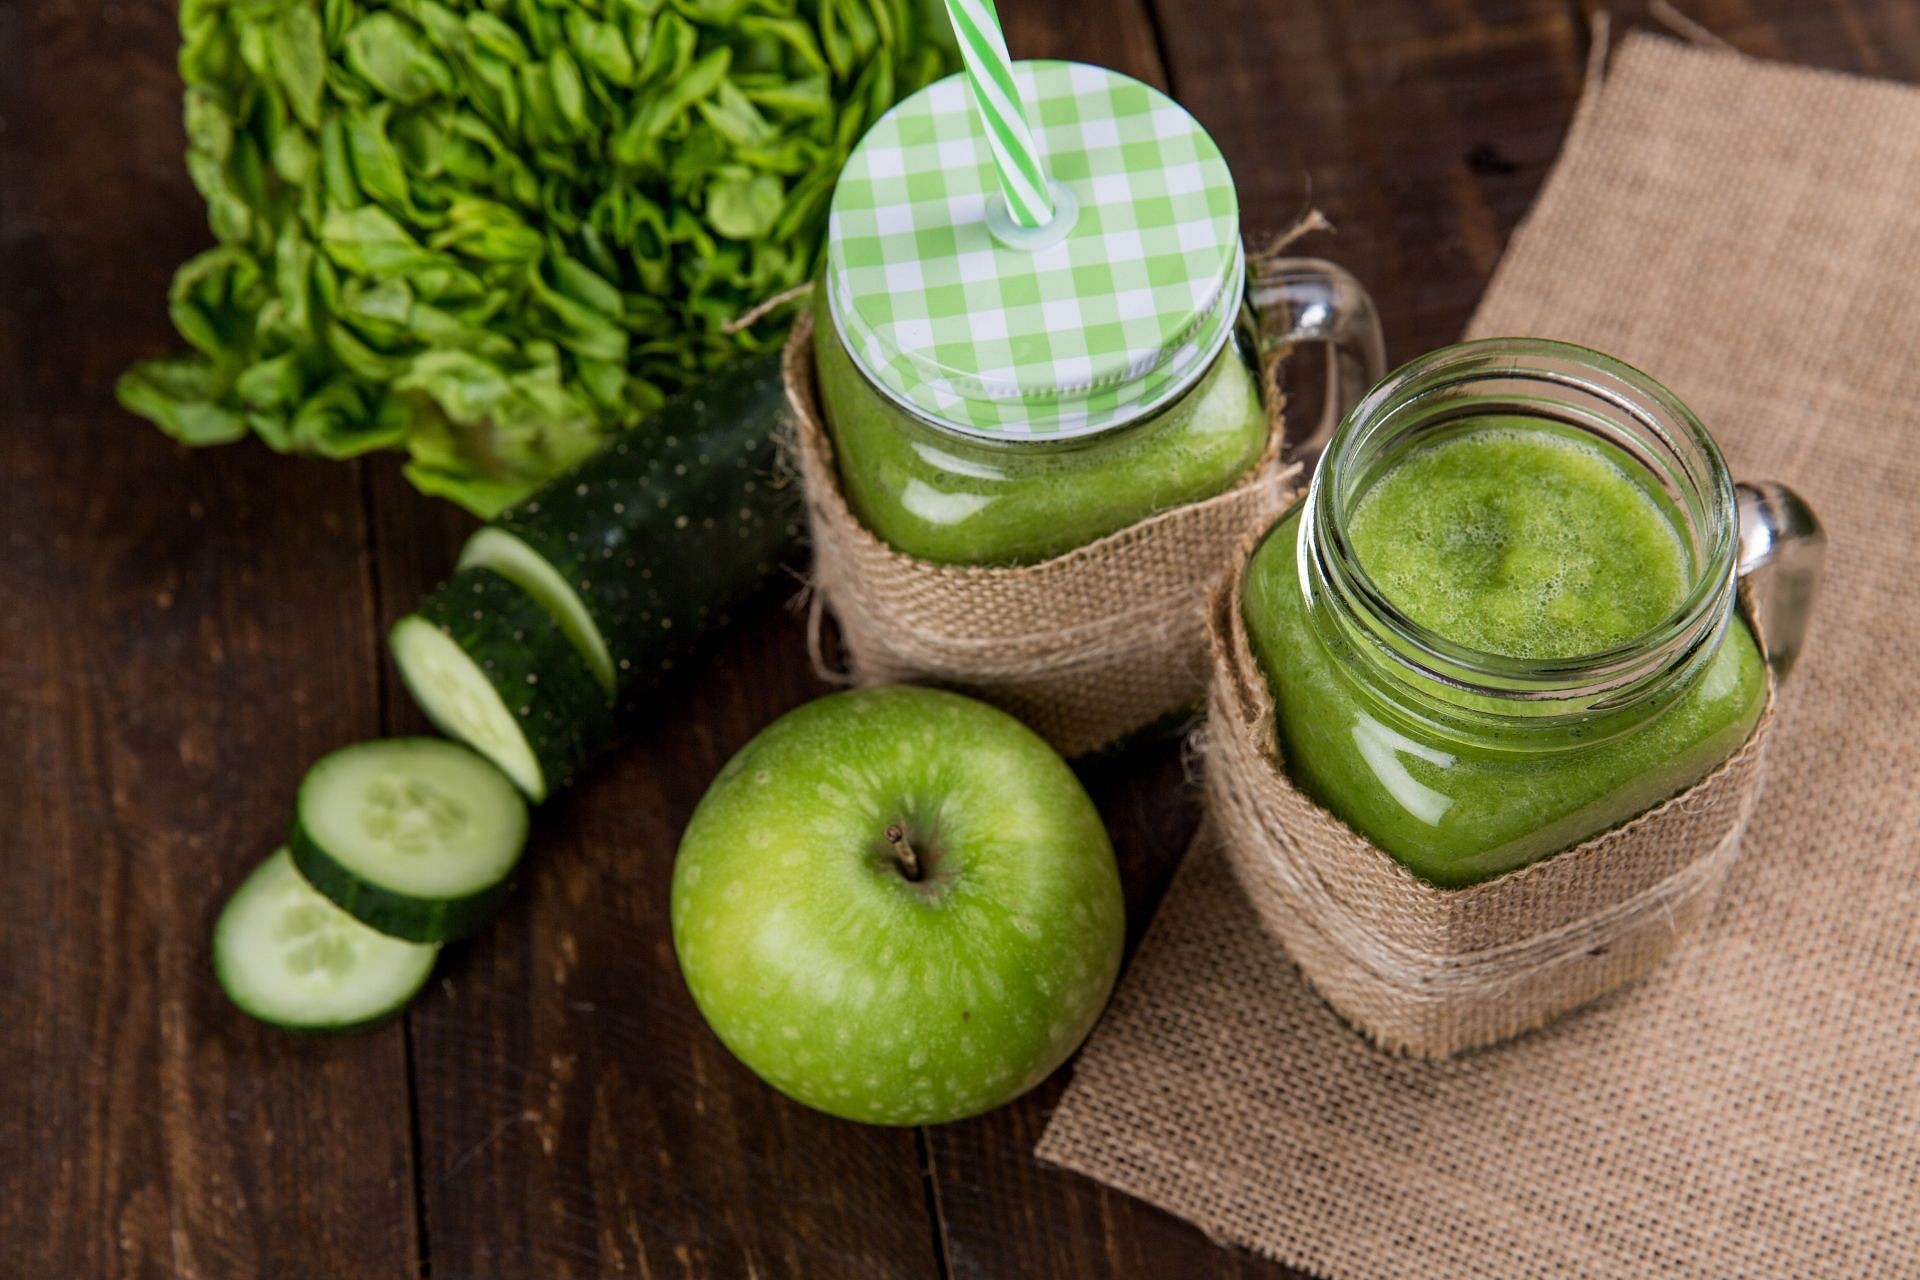 Green juice is a popular drink made by blending a variety of leafy greens, herbs, and vegetables (Image via Pexels)